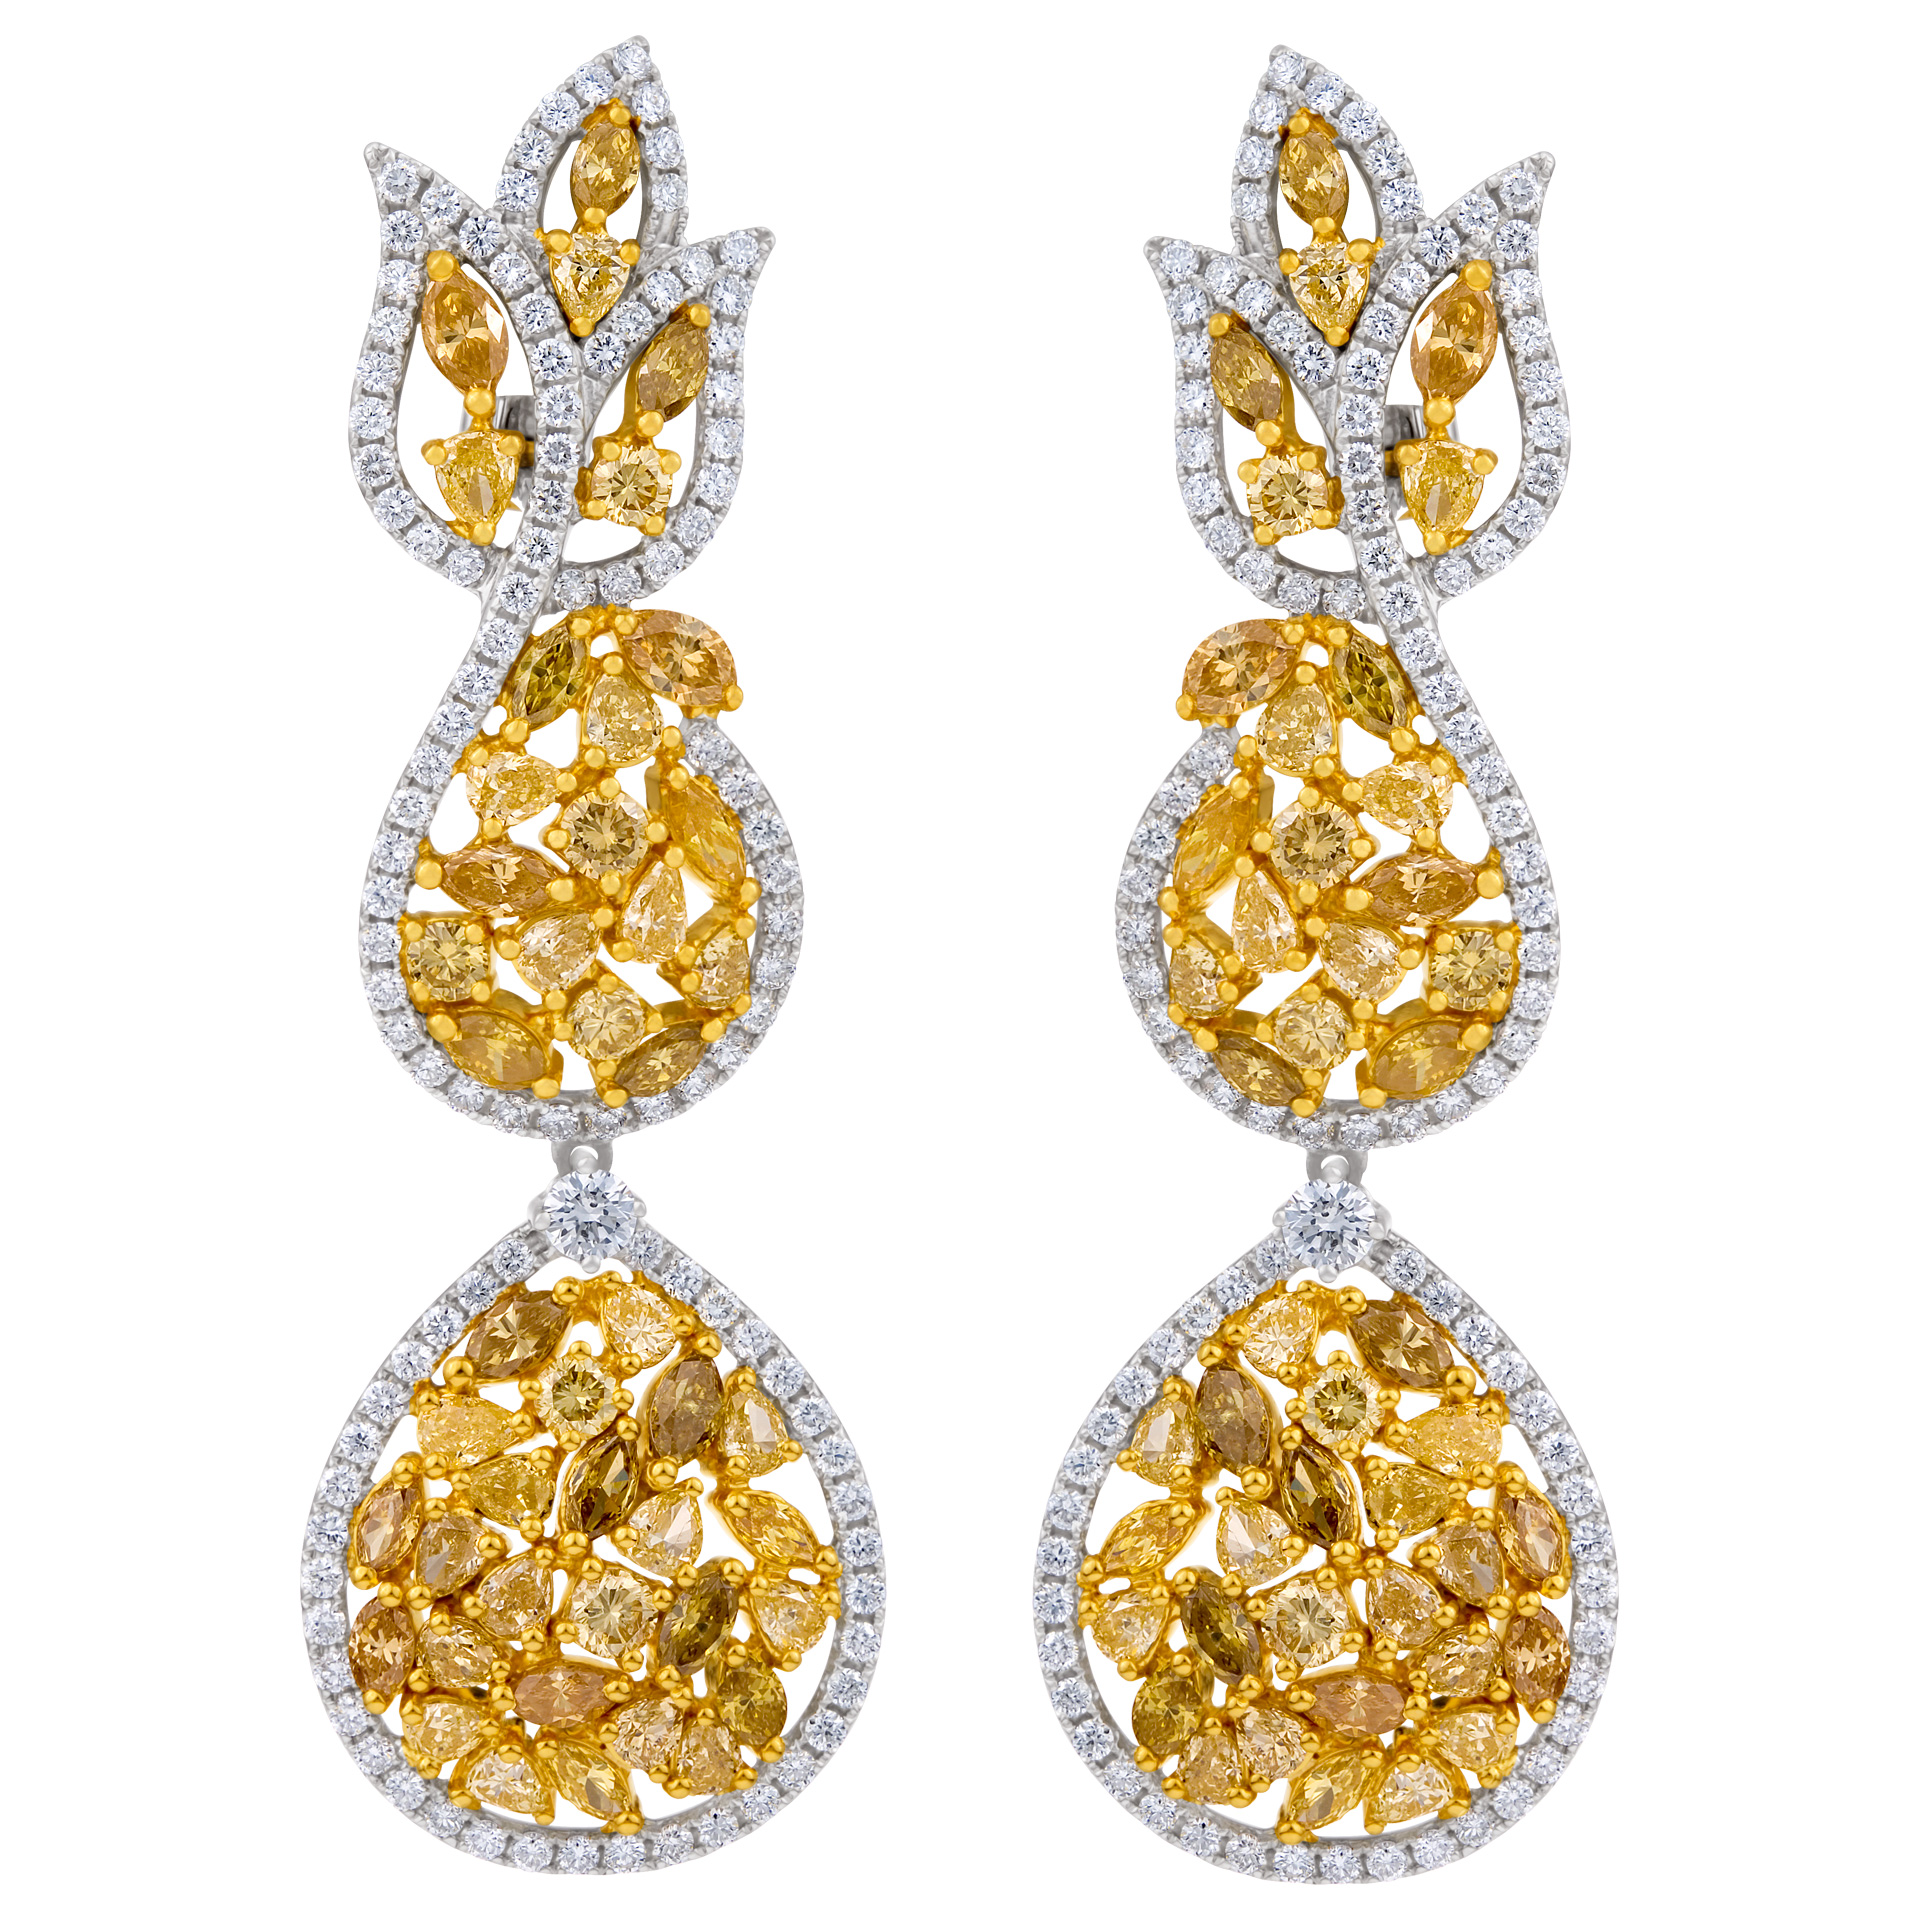 Drop diamond earrings in 18k yellow and white gold image 1